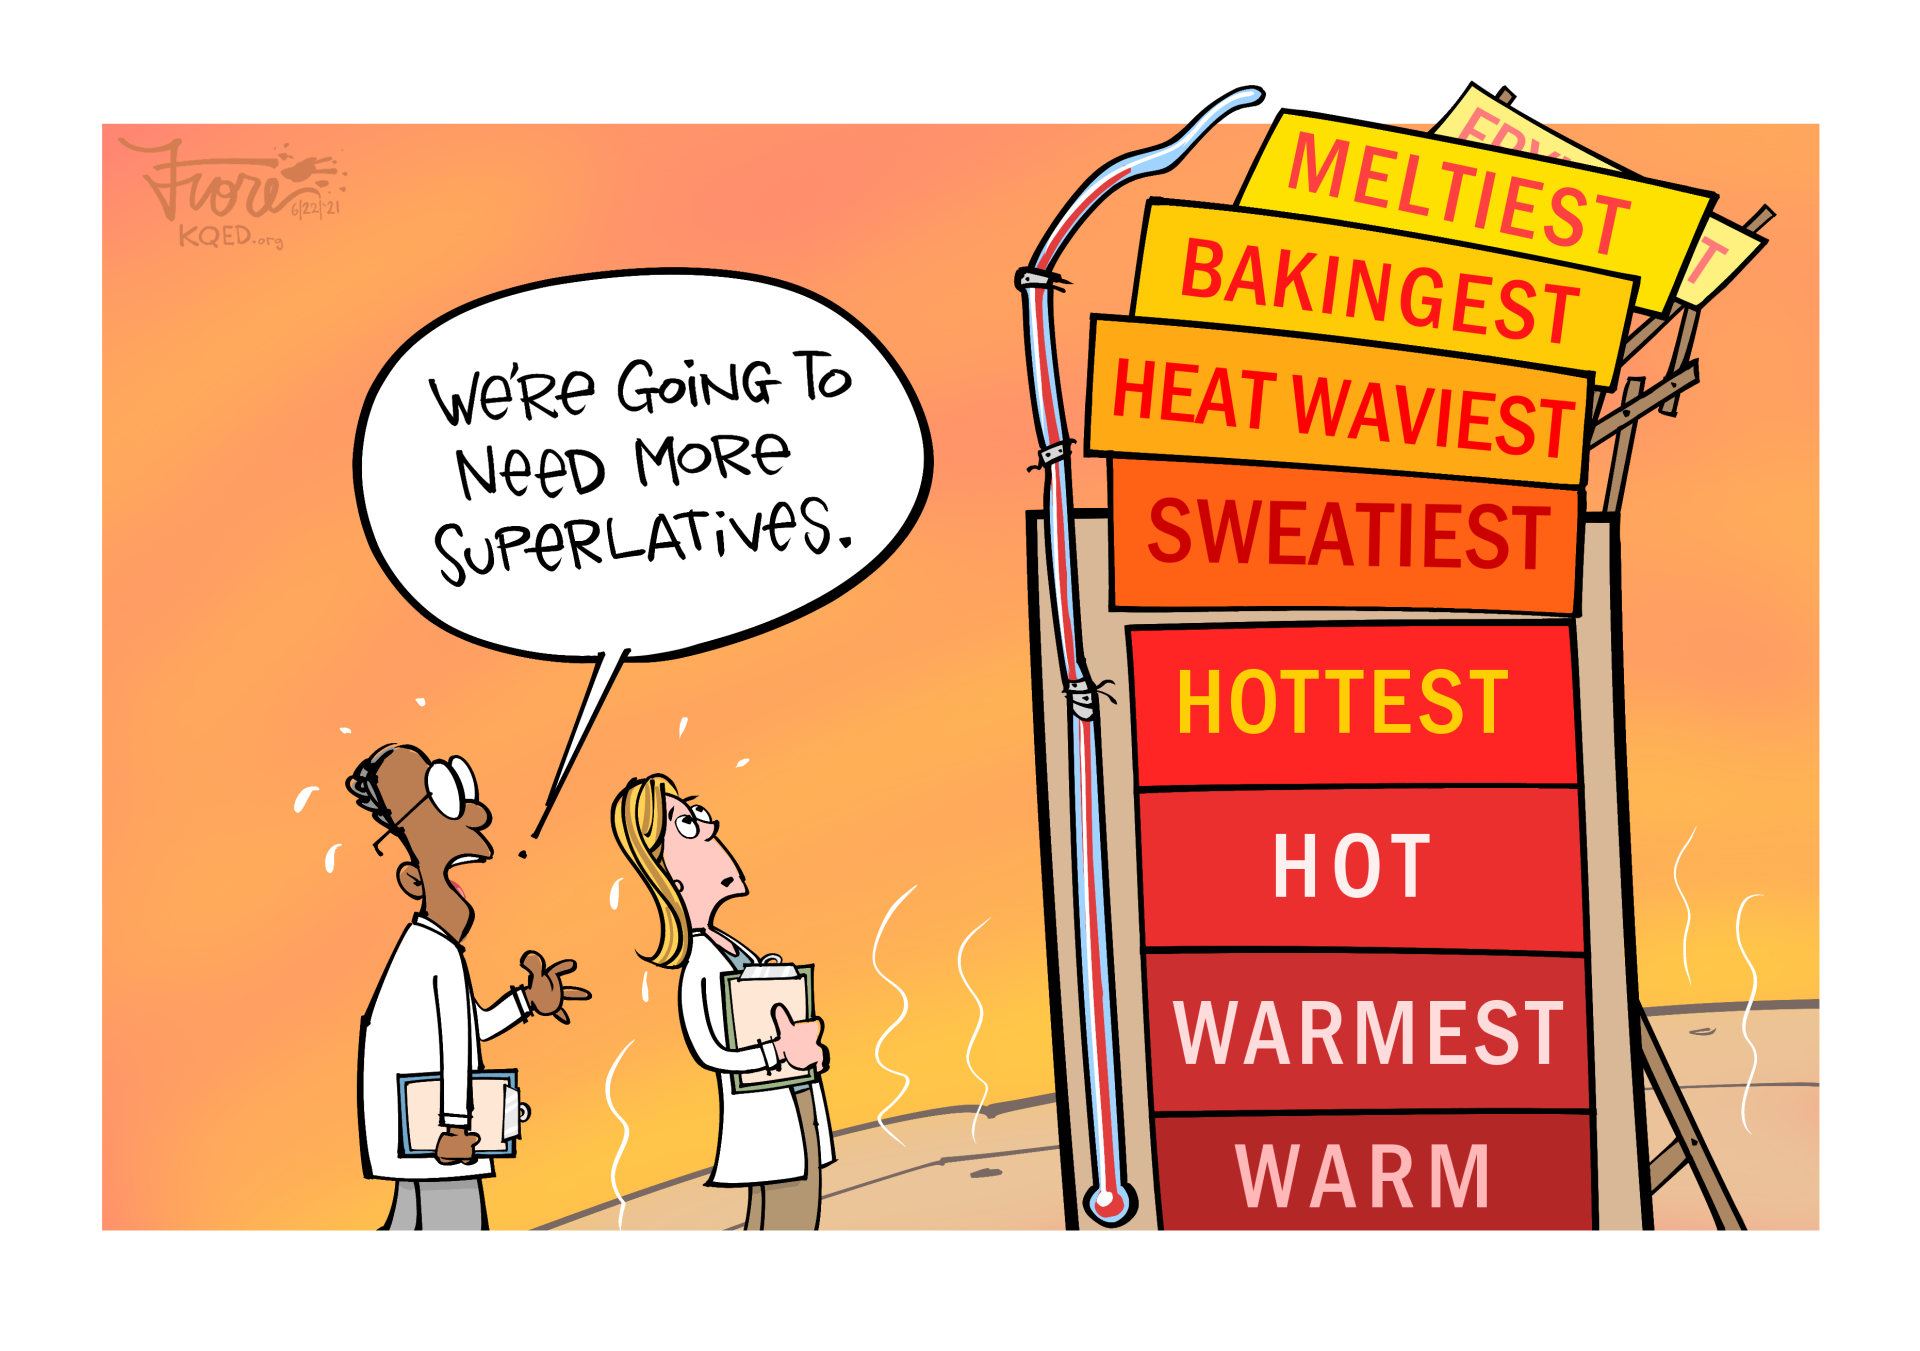 A Mark Fiore cartoon on climate change increasing heat, showing two scientists looking at a thermometer sign that rangest from, warm, warmest, hot, hottest, sweatiest, heat waviest, bakingest, meltiest, as one scientist says," we're going to need more superlatives."